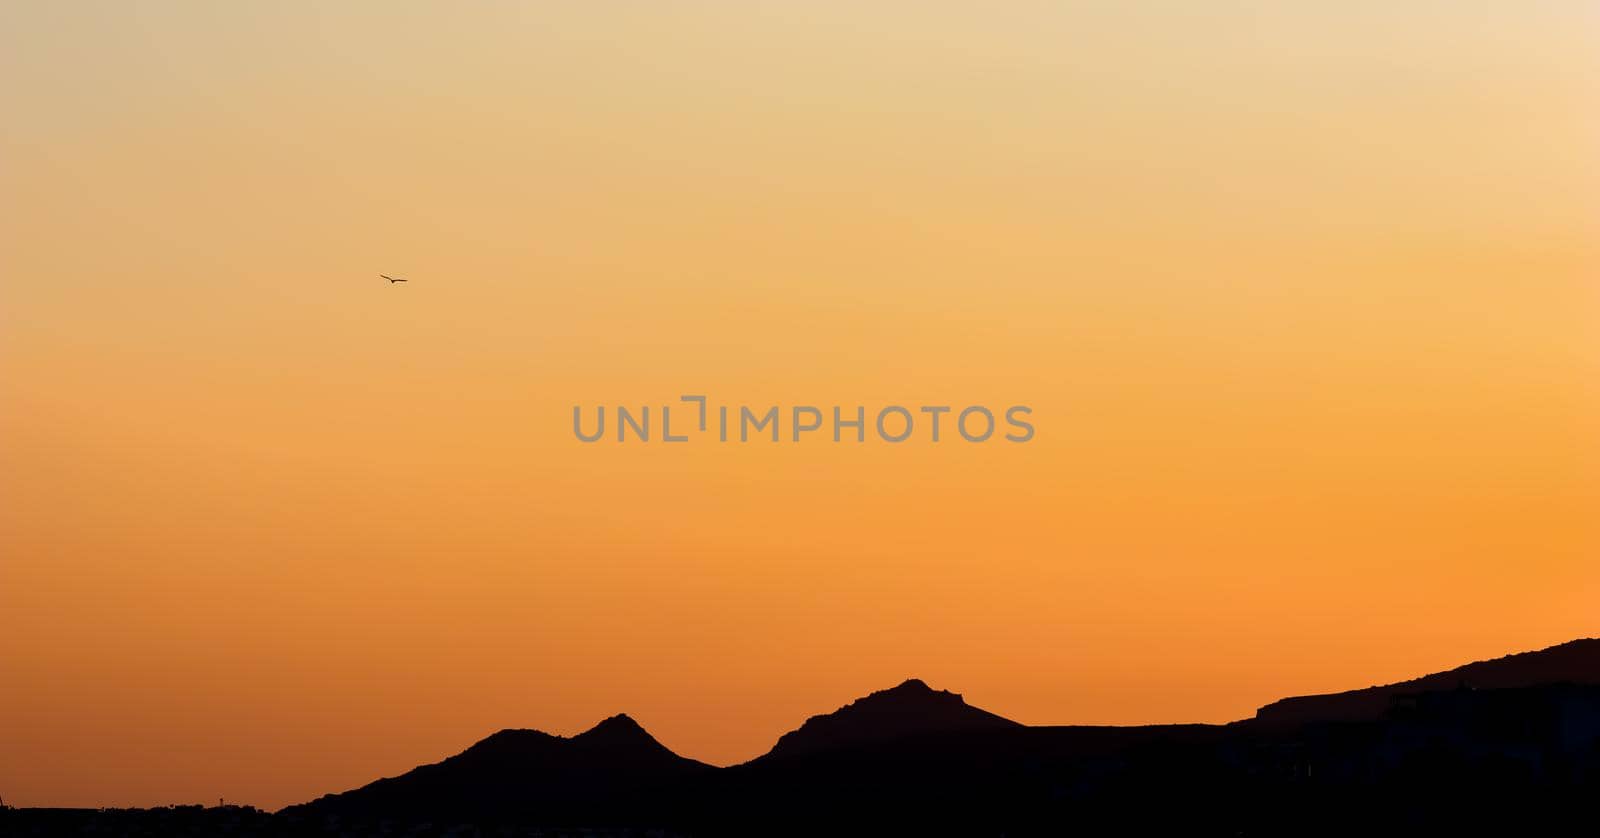 Background from a beautiful colorful sunset with the silhouette of the mountains and a flying bird. High quality photo